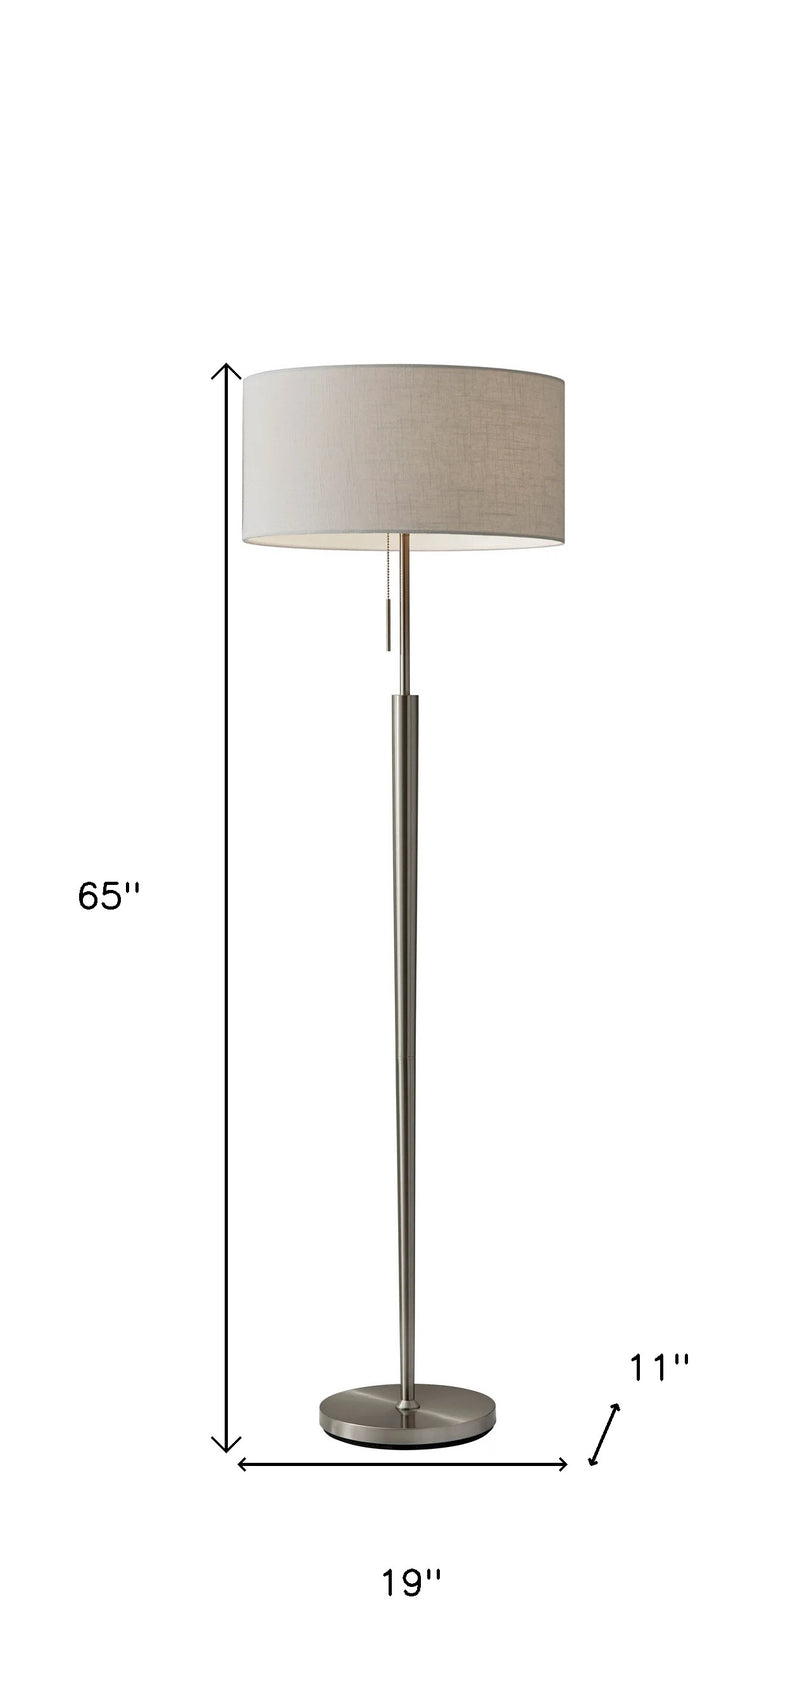 Home Outfitters 65" Traditional Shaped Floor Lamp With Off-White Drum Shade